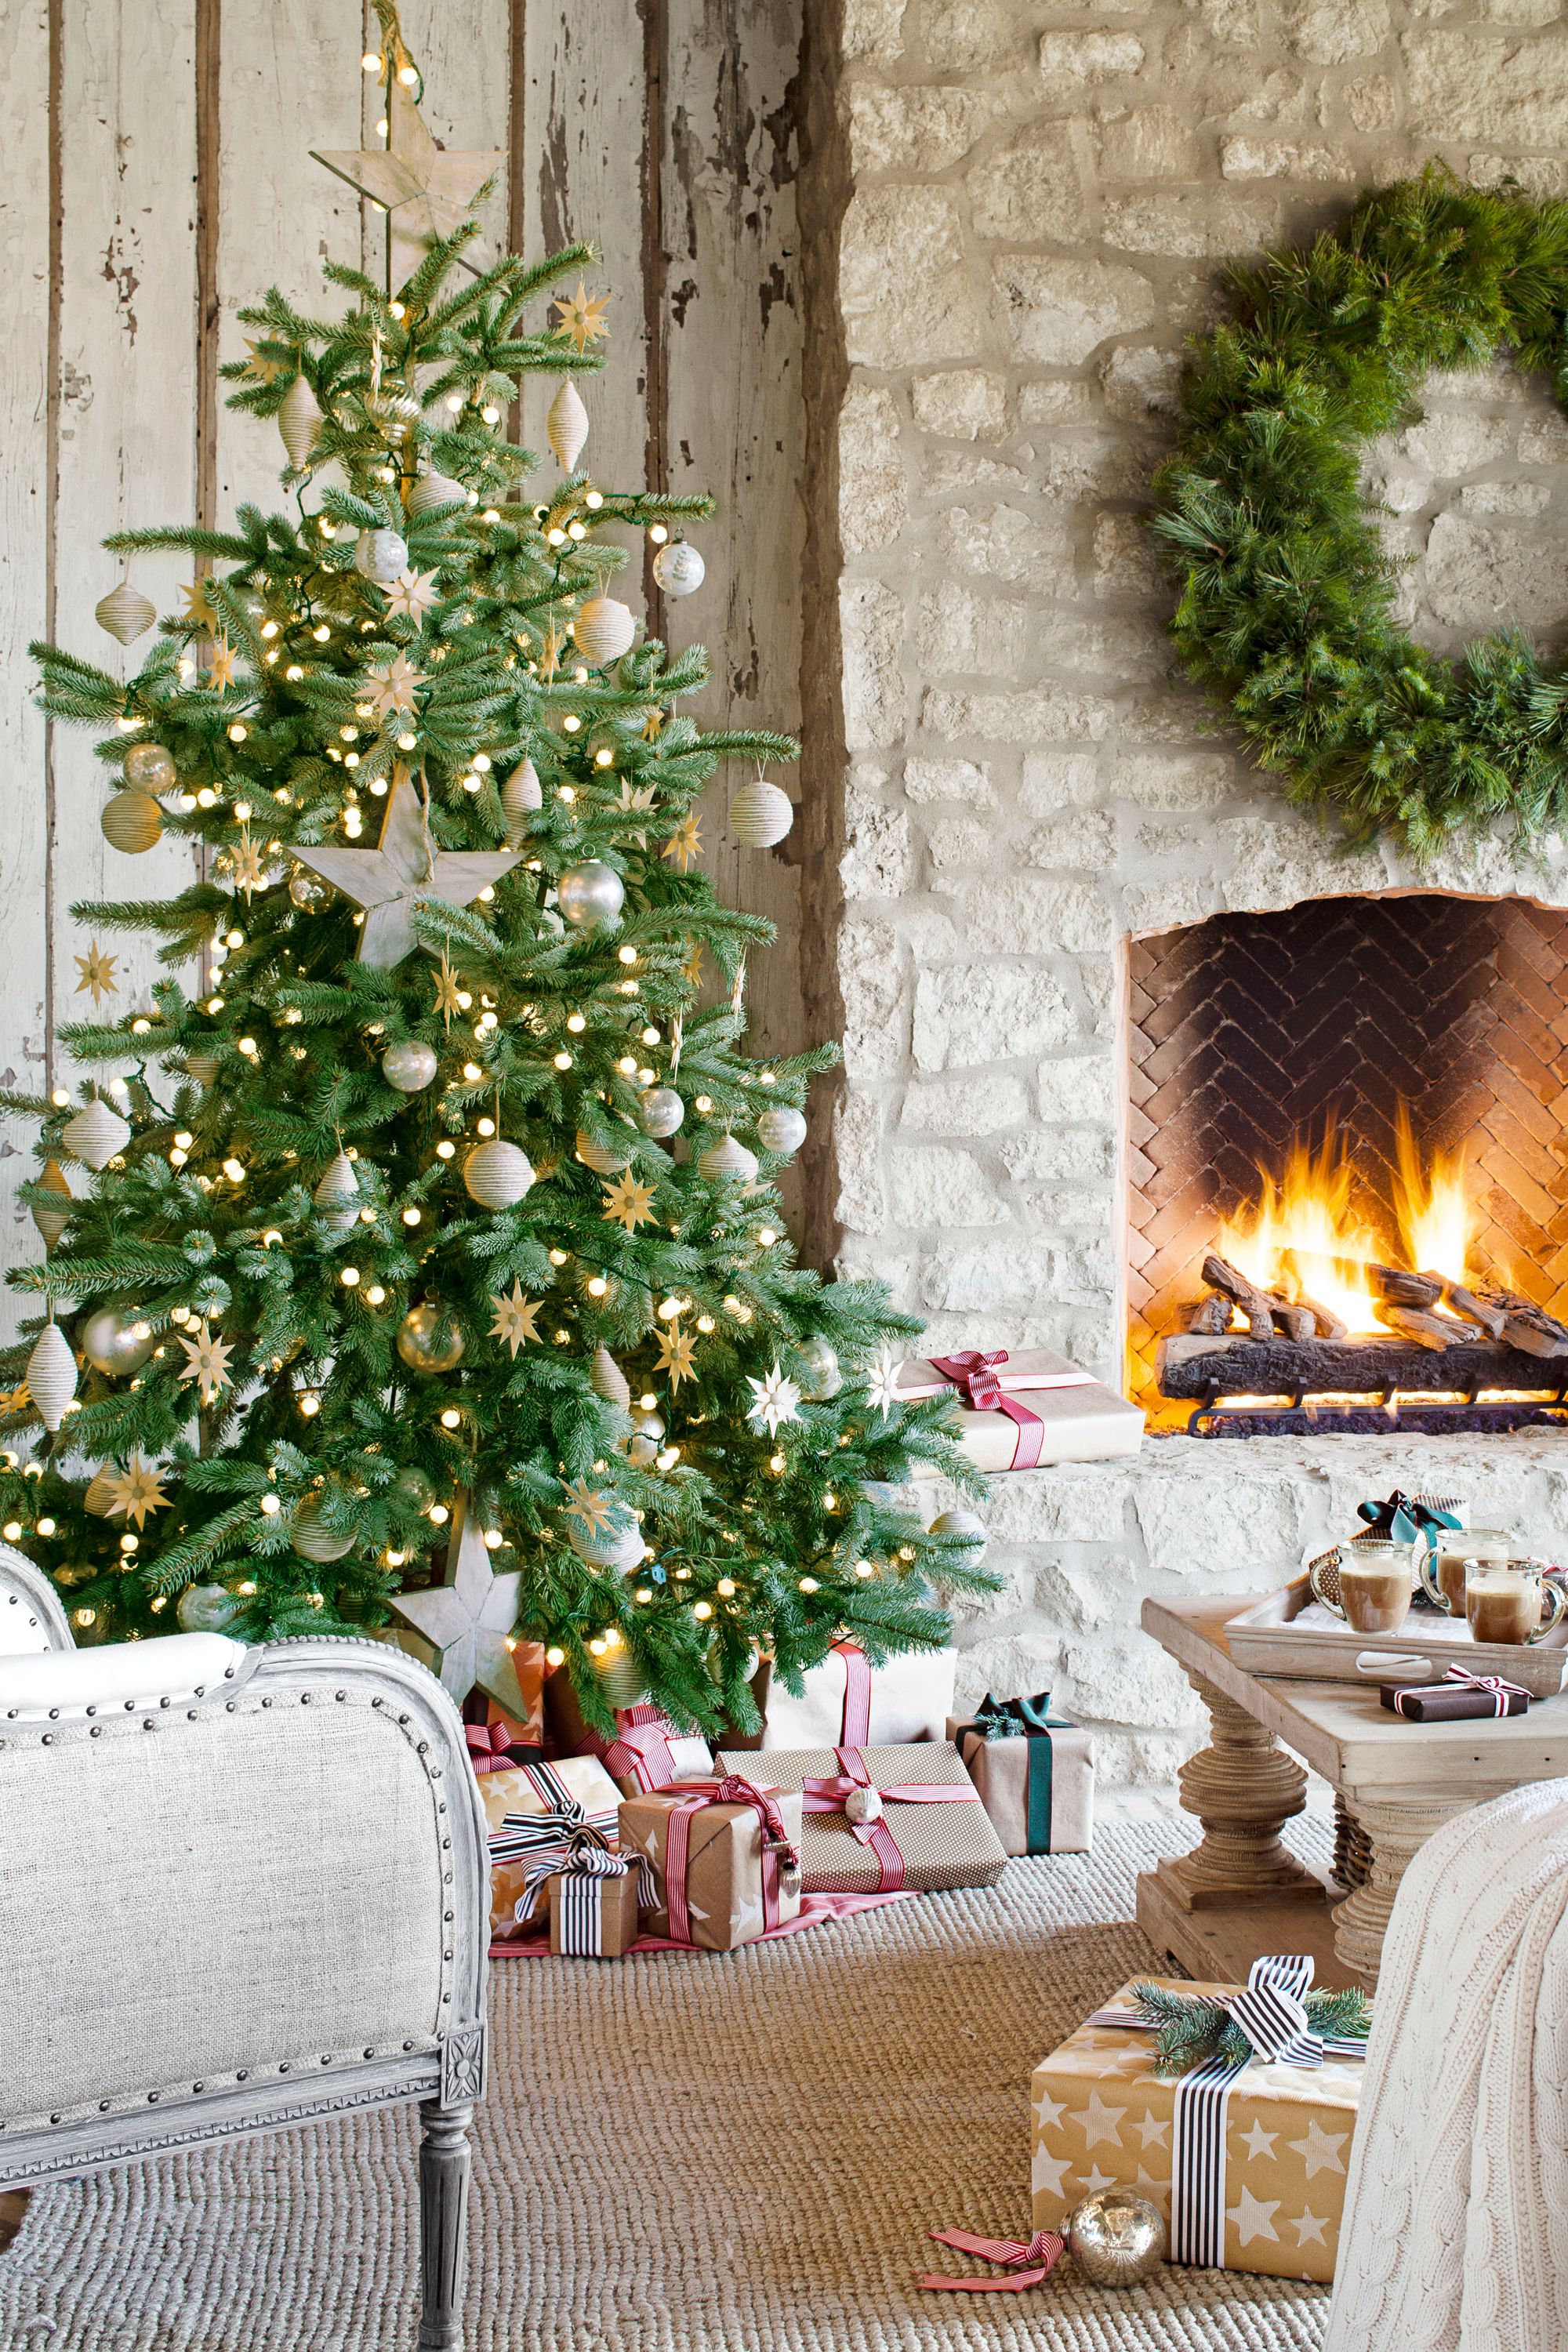 100+ Country Christmas Decorations - Holiday Decorating Ideas 2017